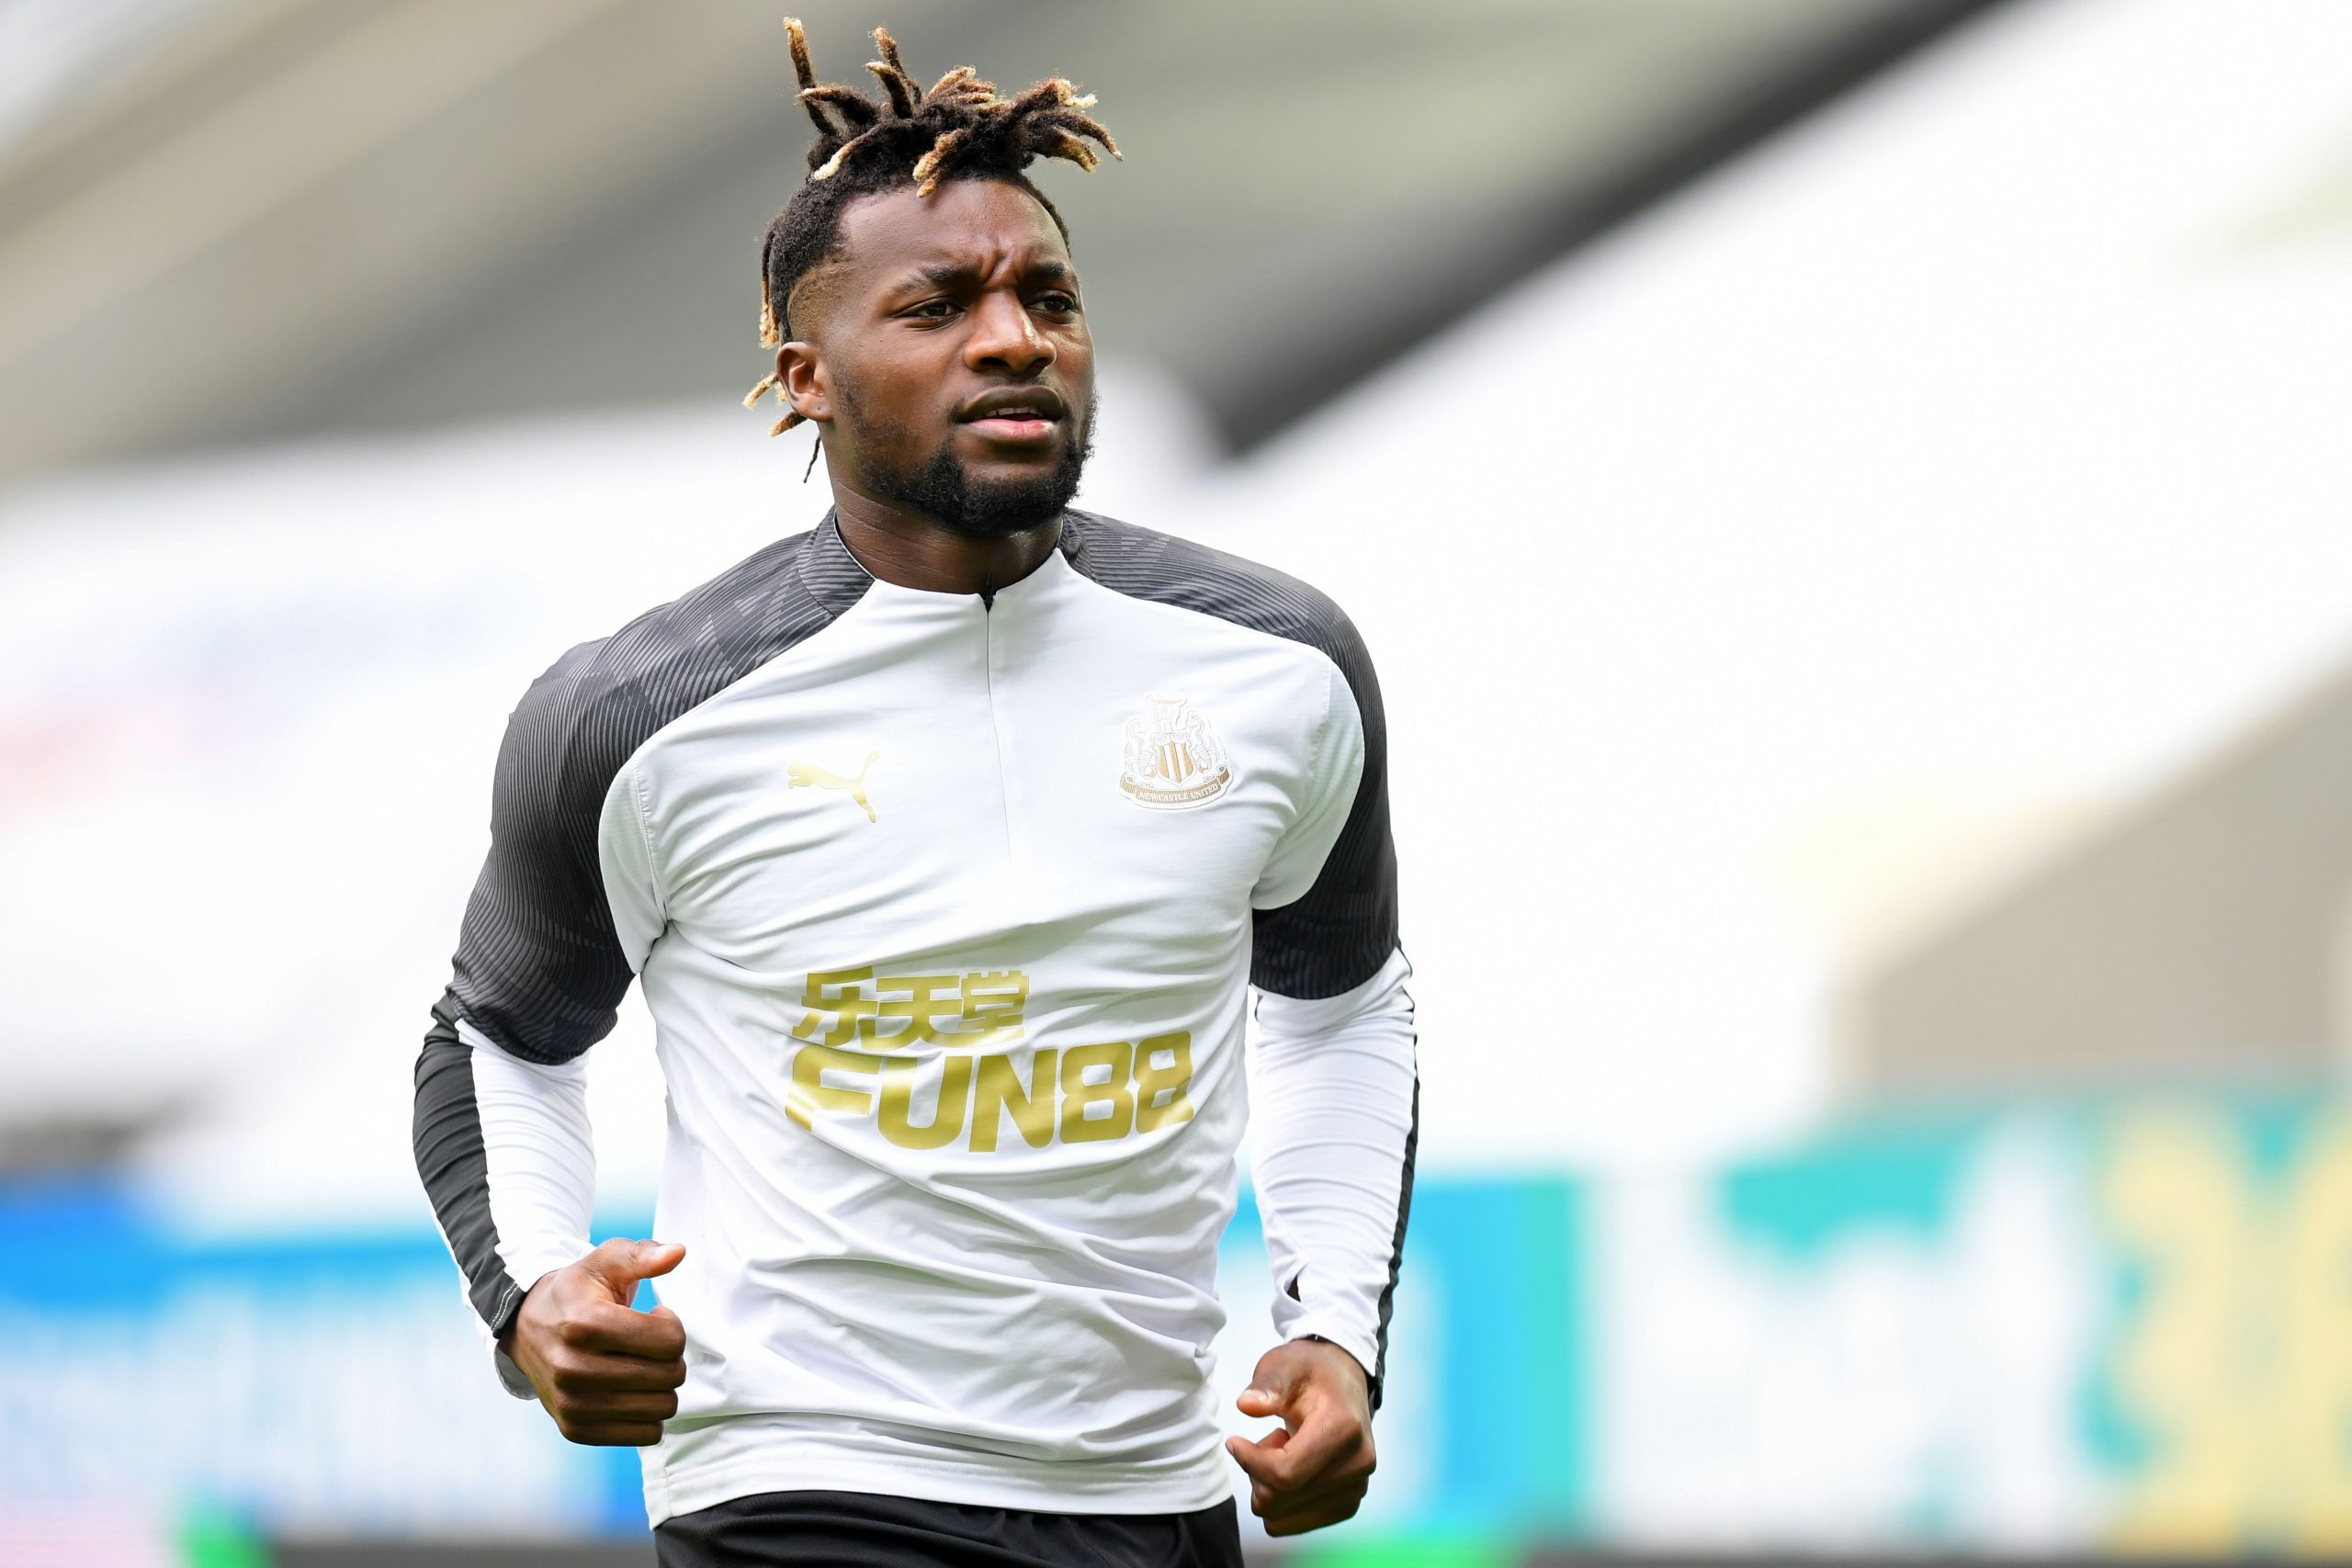 Newcastle United's French midfielder Allan Saint-Maximin warms up ahead of the English Premier League football match between Newcastle United and Tottenham Hotspur at St James' Park in Newcastle-upon-Tyne, north-east England on July 15, 2020. (Photo by Michael Regan / POOL / AFP) / RESTRICTED TO EDITORIAL USE. No use with unauthorized audio, video, data, fixture lists, club/league logos or 'live' services. Online in-match use limited to 120 images. An additional 40 images may be used in extra time. No video emulation. Social media in-match use limited to 120 images. An additional 40 images may be used in extra time. No use in betting publications, games or single club/league/player publications. / (Photo by MICHAEL REGAN/POOL/AFP via Getty Images)